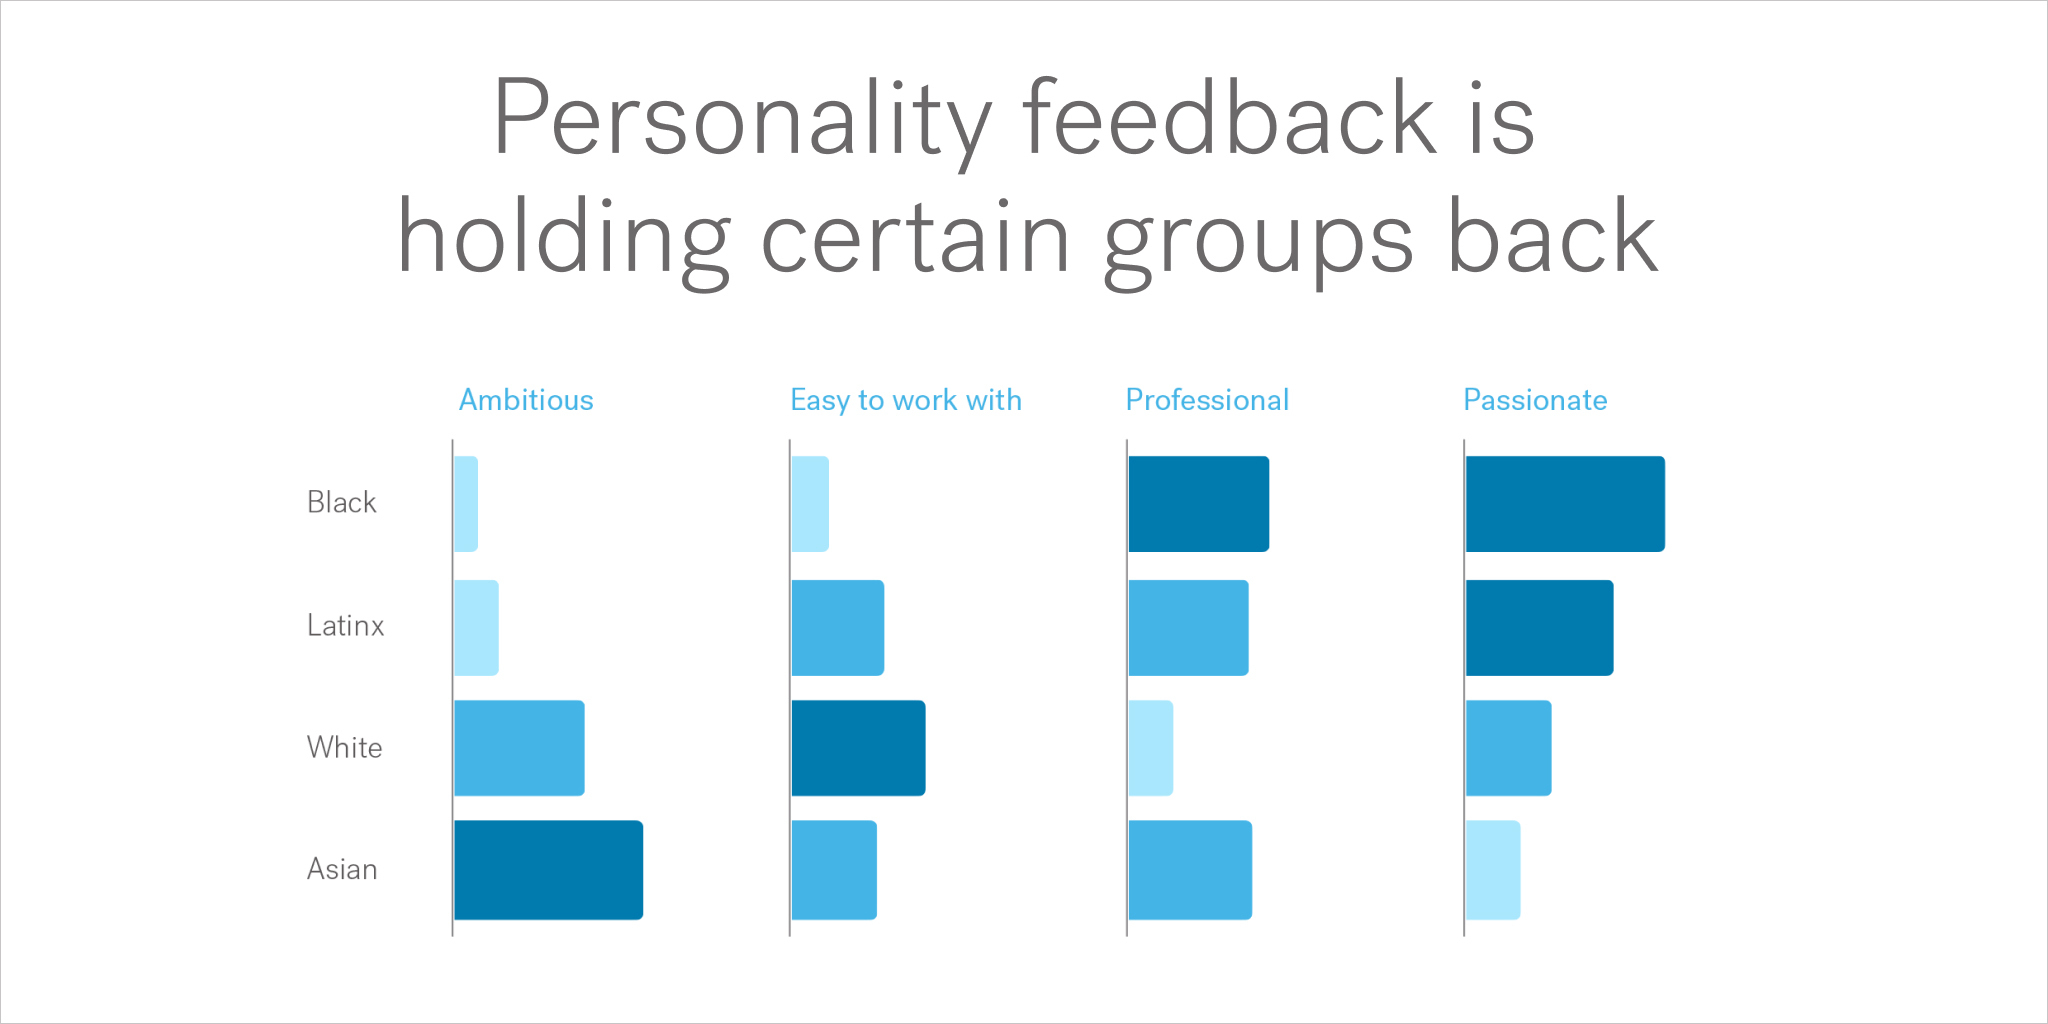 Personality feedback is holding certain groups back